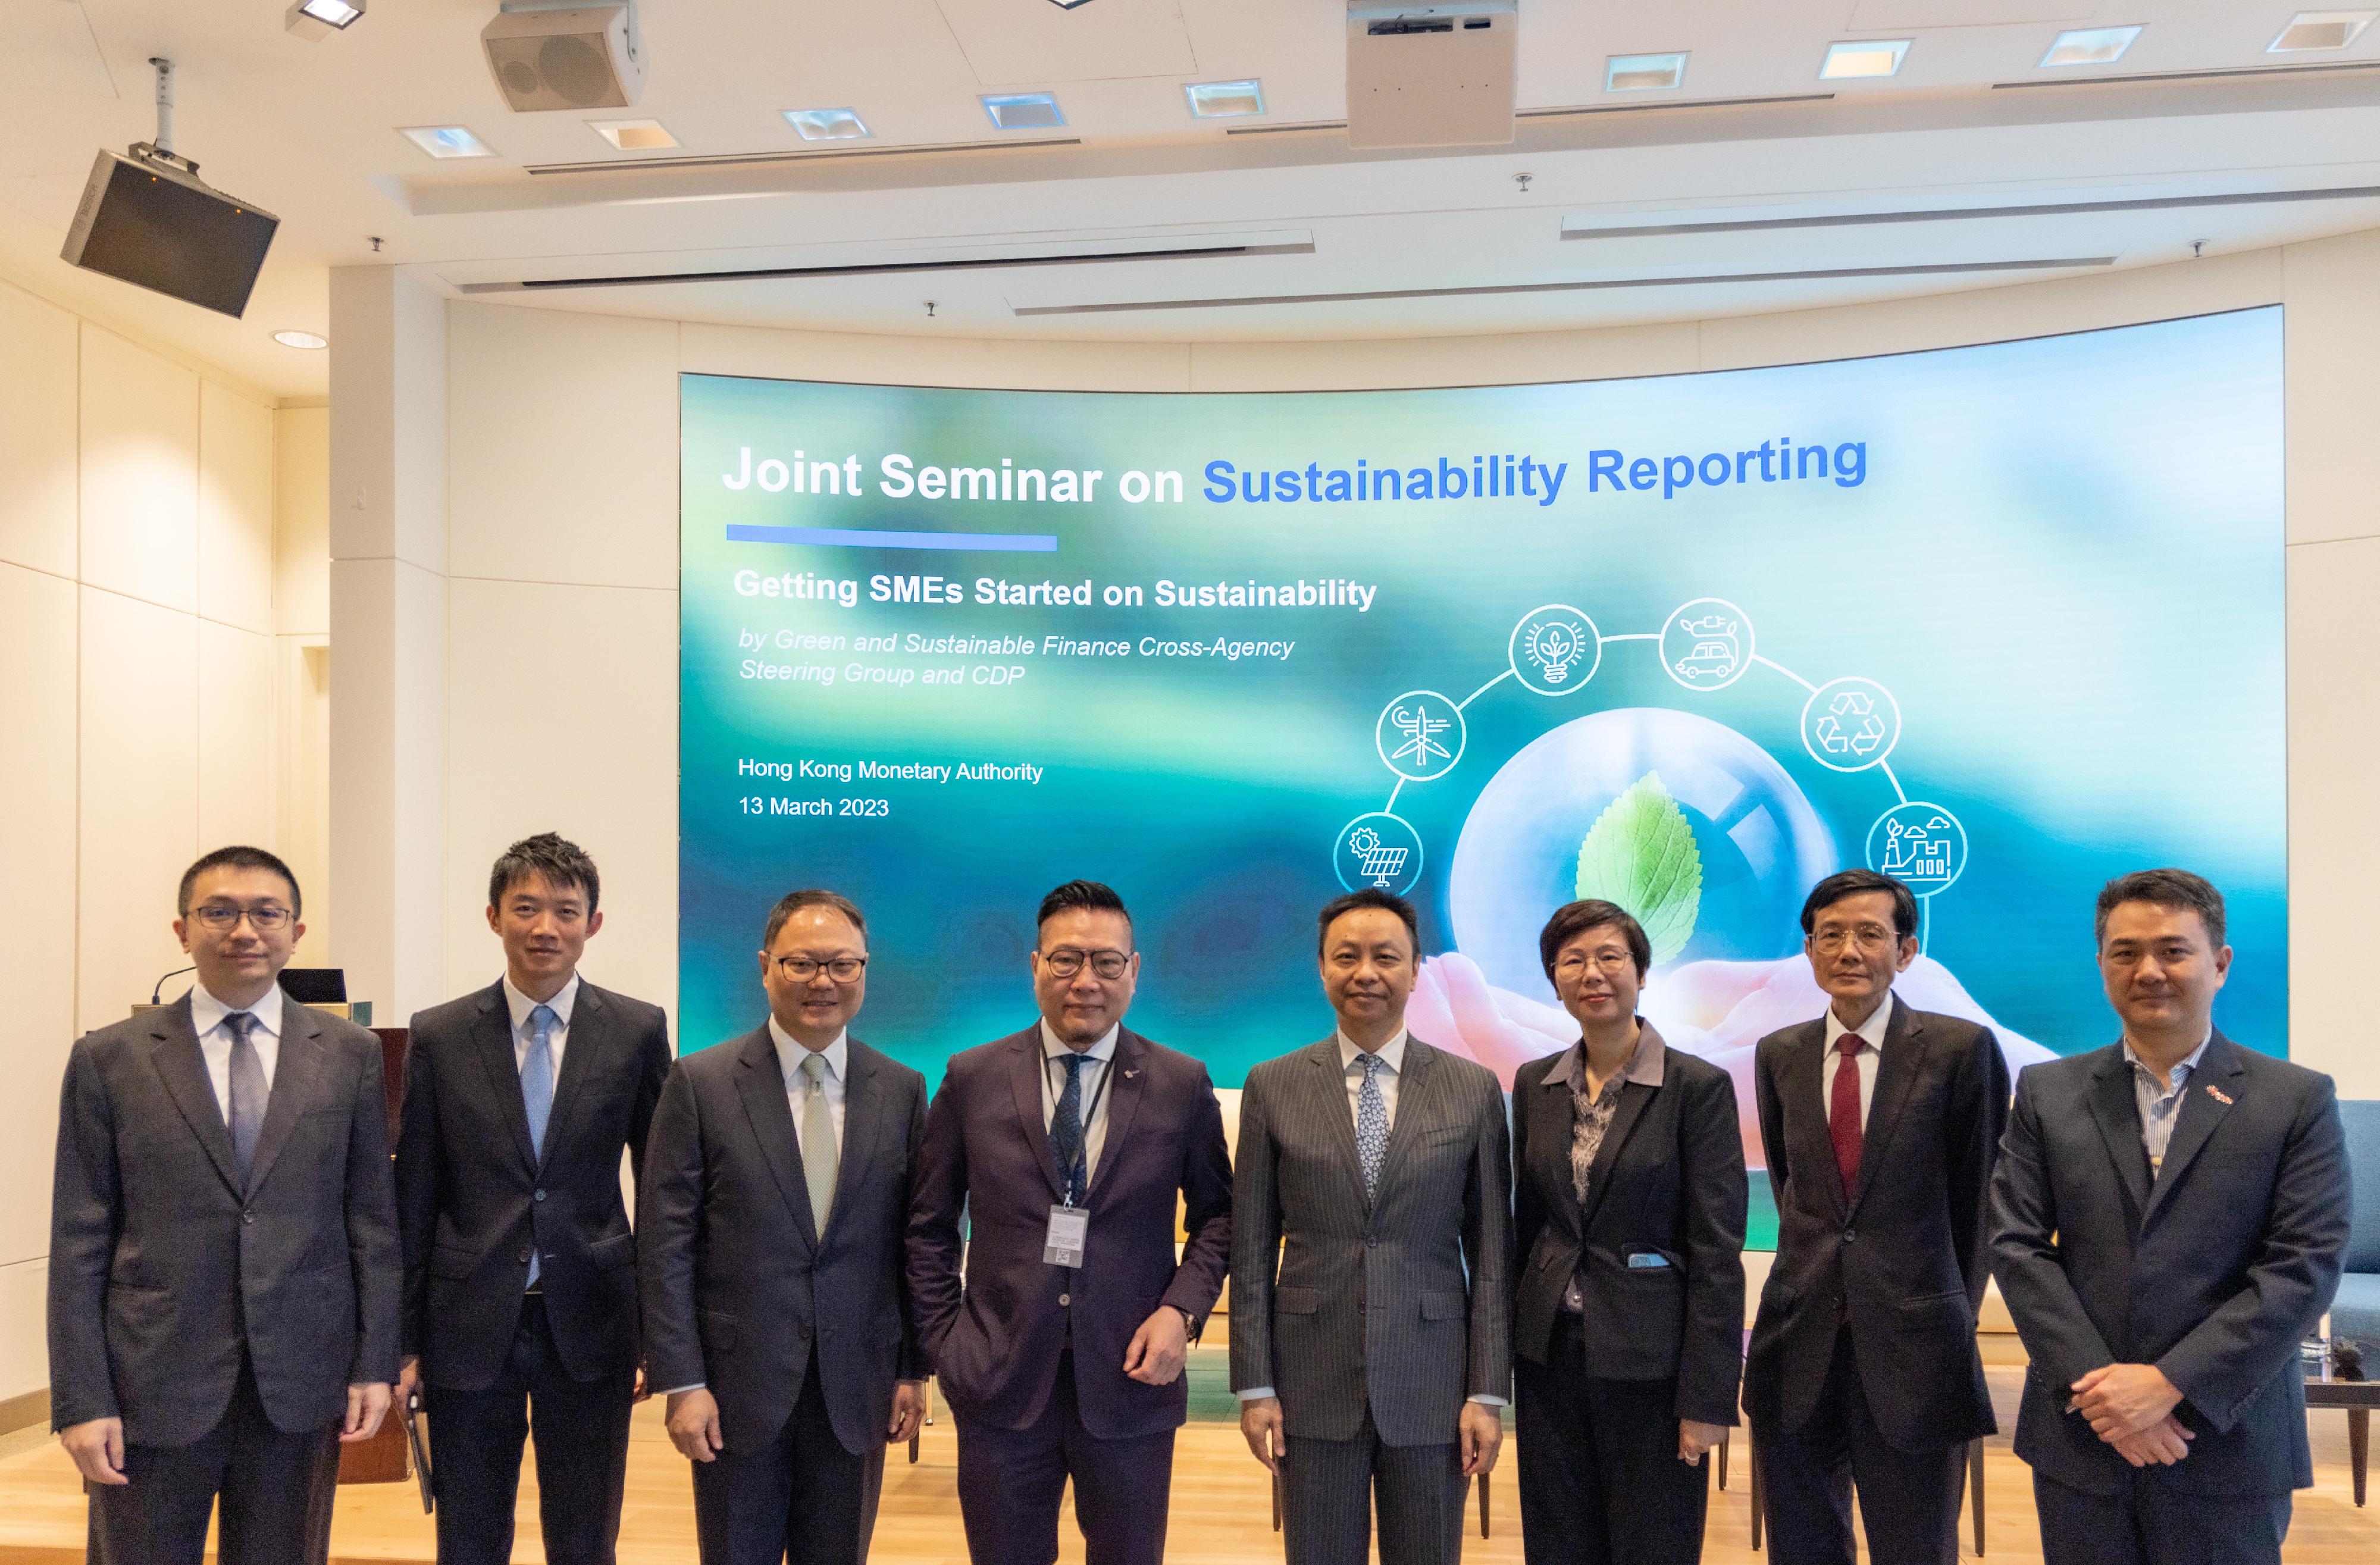 The Green and Sustainable Finance Cross-Agency Steering Group and CDP co-organised a joint seminar on sustainability reporting today (March 13). Photo shows (from left) the Head of Carbon and ESG Products of the Hong Kong Exchanges and Clearing Limited, Mr Ken Chiu; the Head of Market Development Division of the Hong Kong Monetary Authority (HKMA), Mr Kenneth Hui; the CEO of Zurich Insurance Company Limited and Chairman of Task Force on Green Insurance of the Hong Kong Federation of Insurers, Mr Eric Hui; the President of the Chinese Manufacturers' Association of Hong Kong, Dr Allen Shi; Deputy Chief Executive of the HKMA Mr Darryl Chan; the Managing Director and Head of Risk Management of Citibank Hong Kong Limited, Ms Cindy Pau; the Chief Financial Officer of HK Electric Investments, Mr Wong Kim-man; and the Managing Director of Asia Pacific of CDP, Mr Donald Chan.